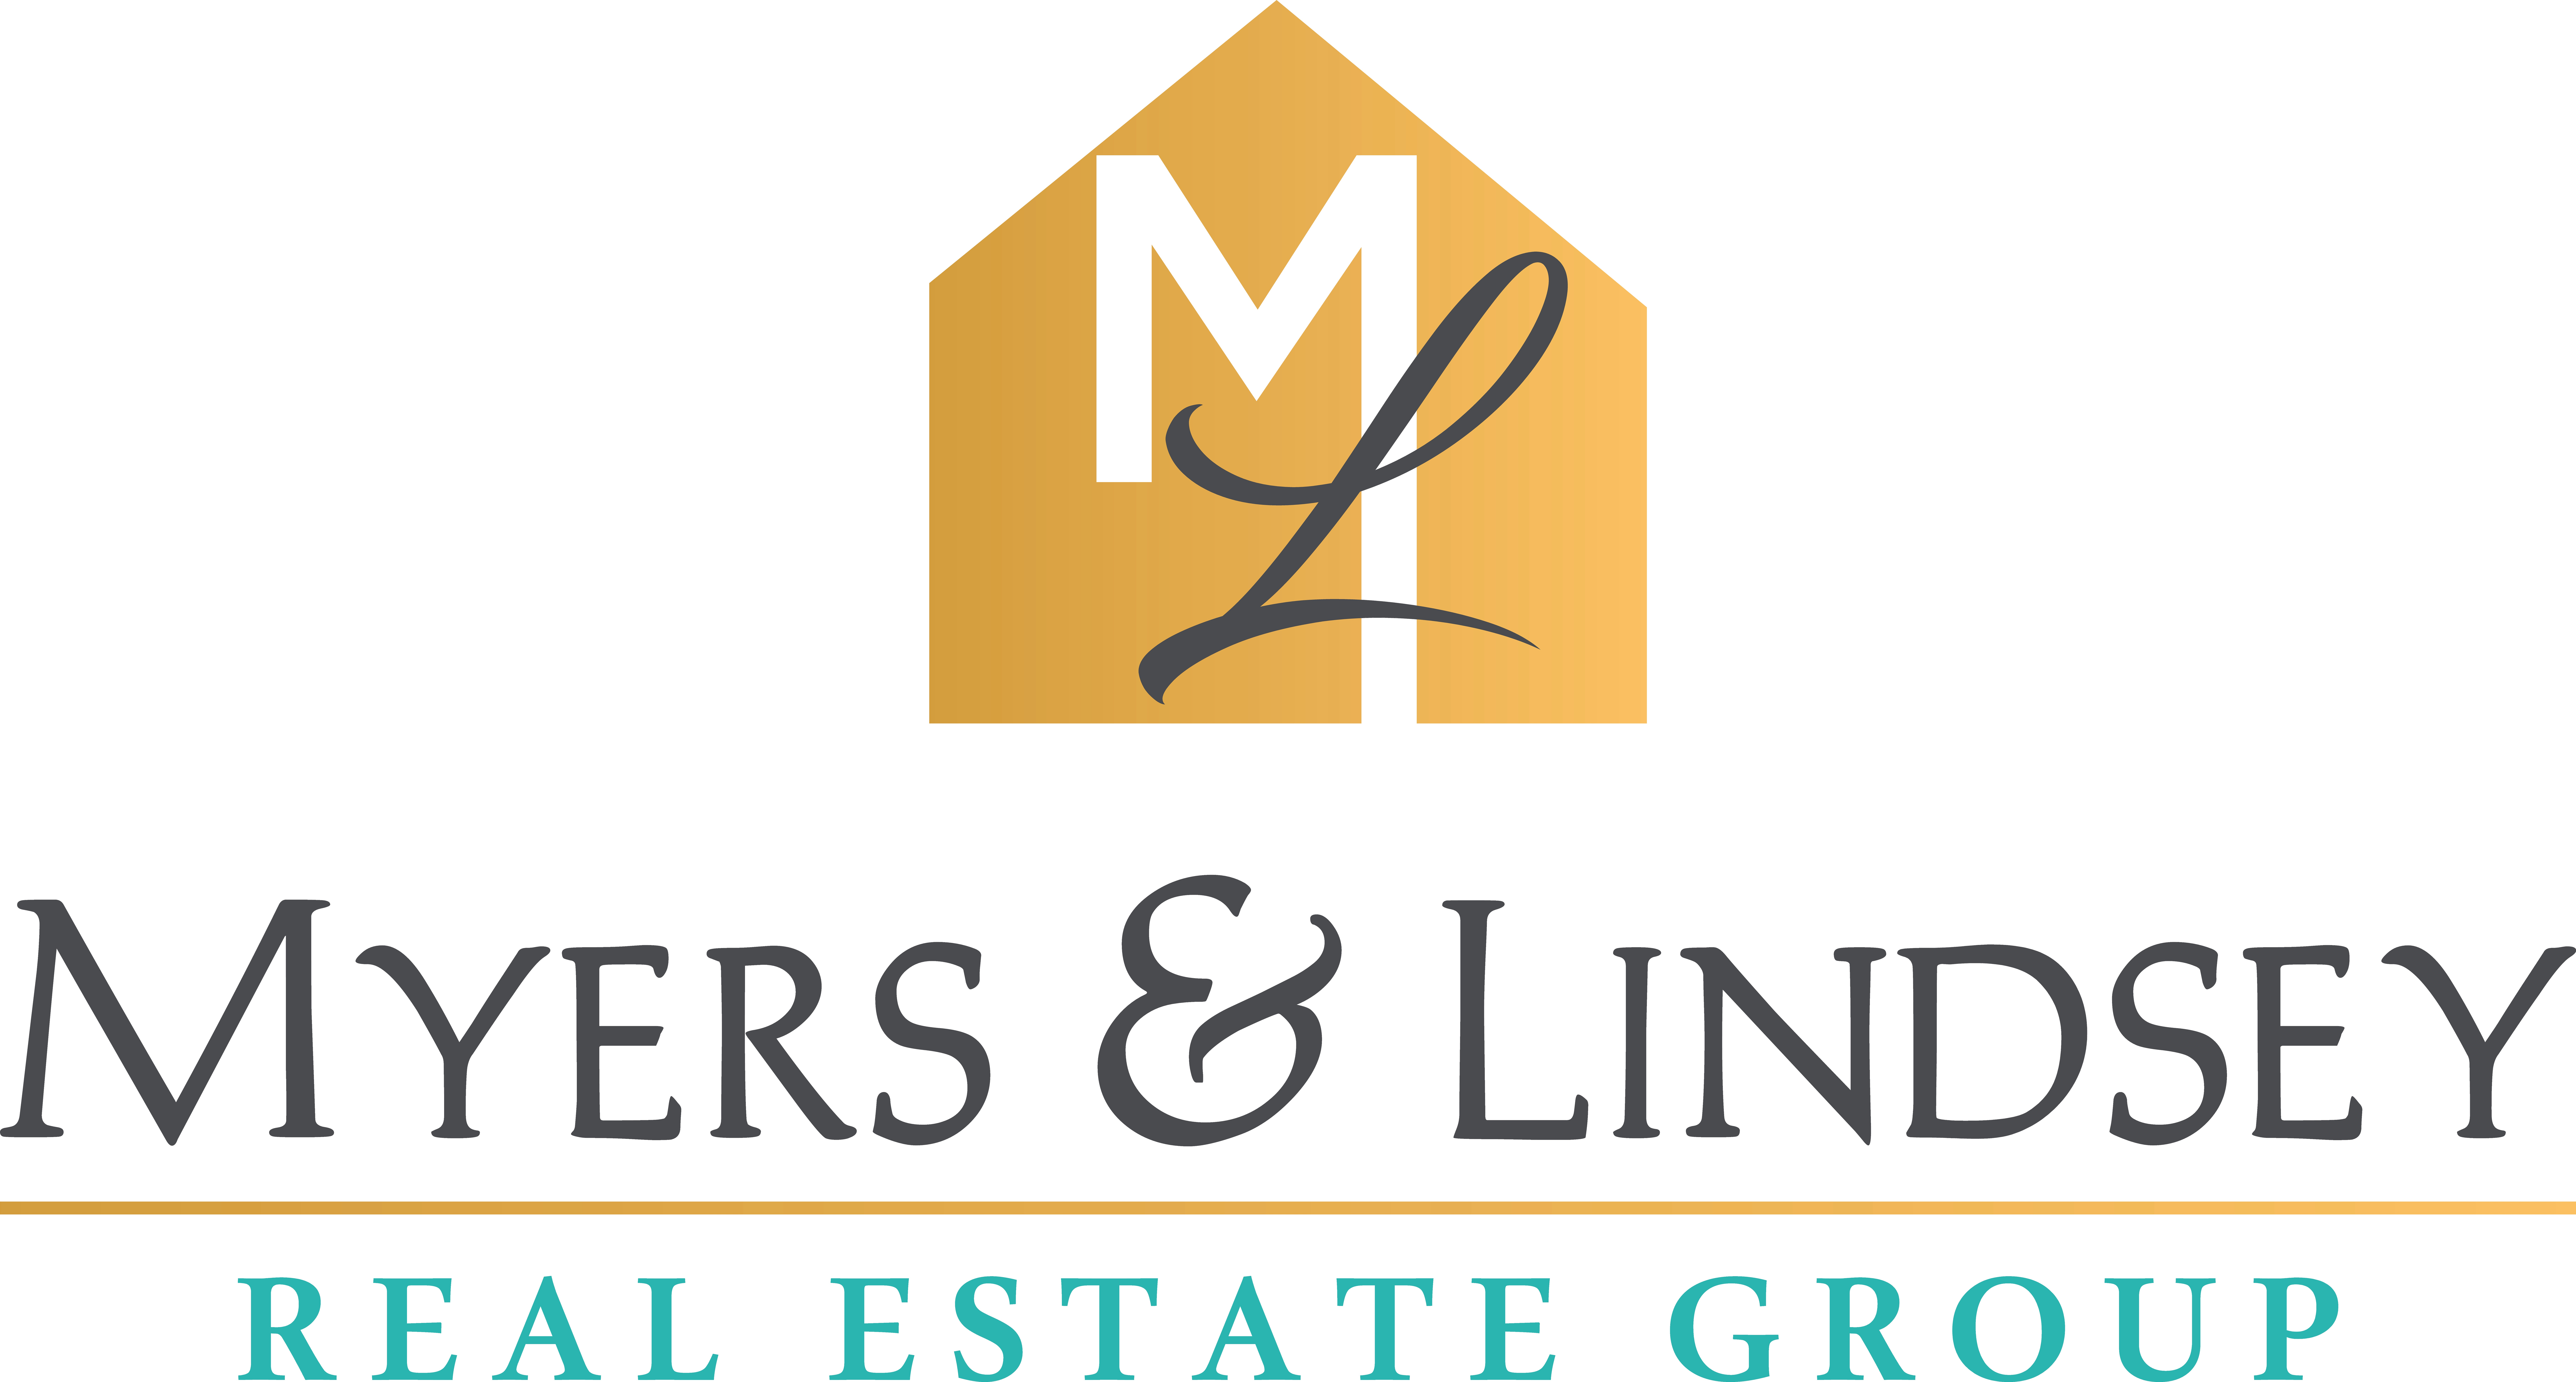 Myers & Lindsey Real Estate